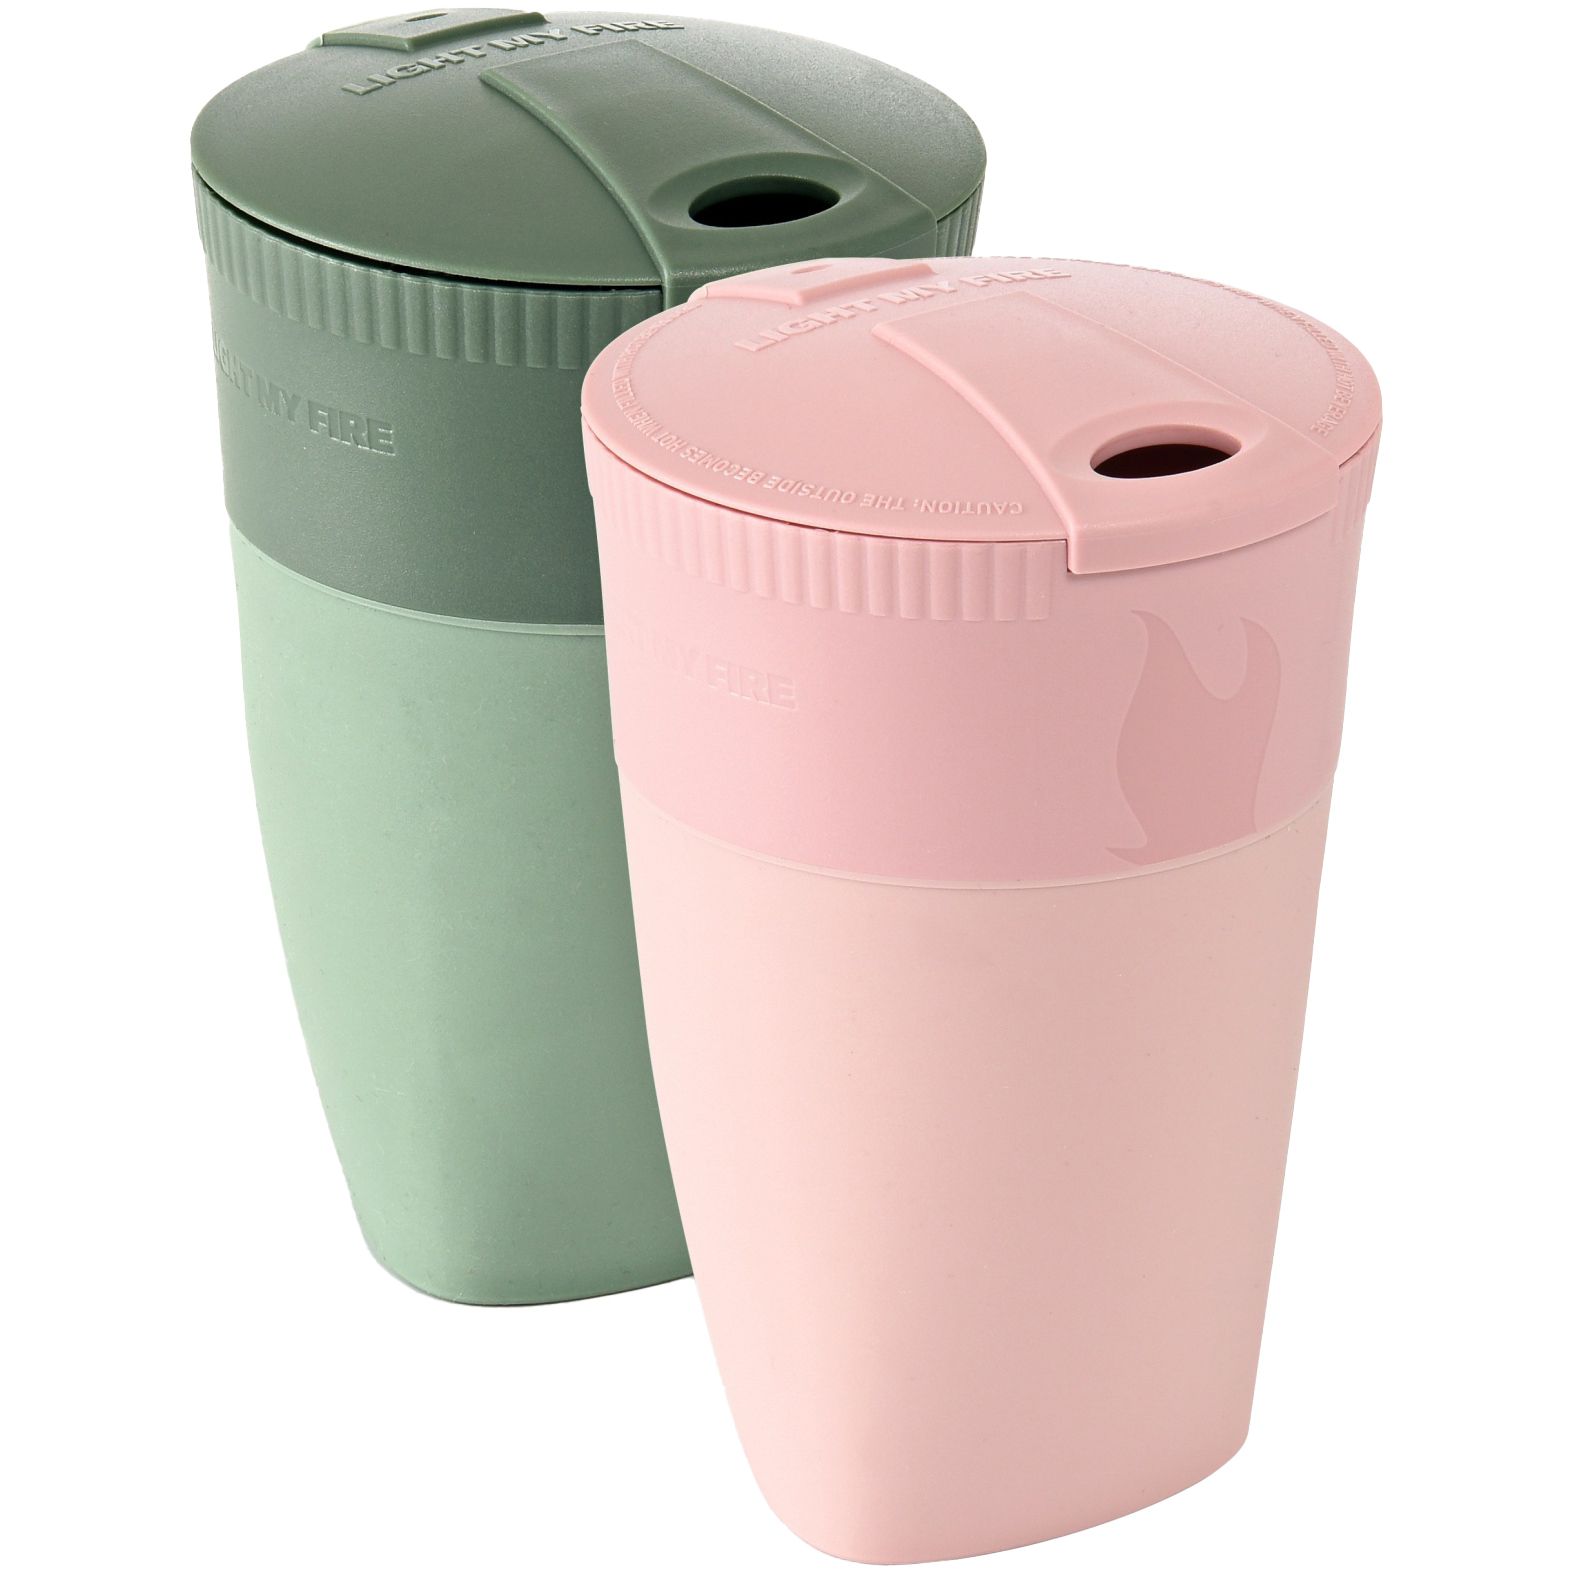 Picture of Light My Fire Pack-up-Cup BIO 2-pack - 2 x 260 ml - dustypink/sandygreen